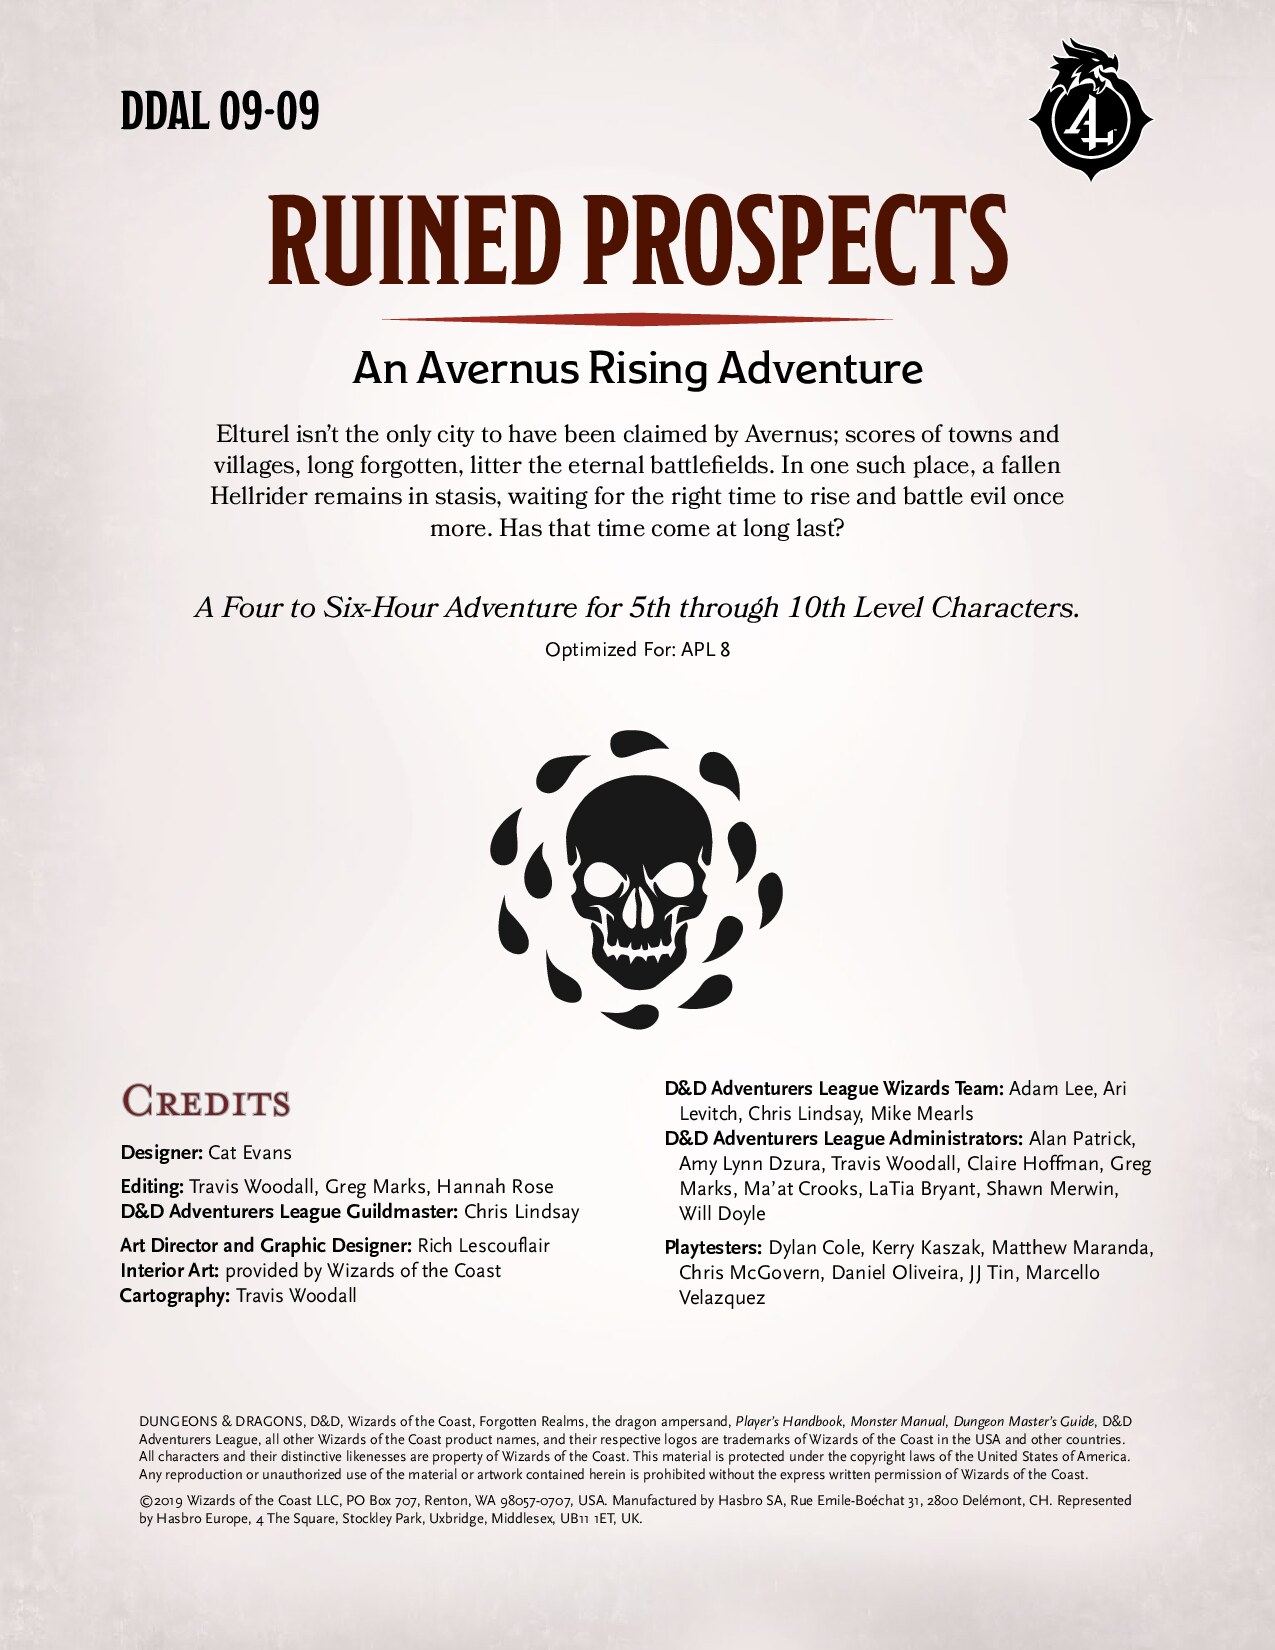 DDAL09-09 - Ruined Prospects